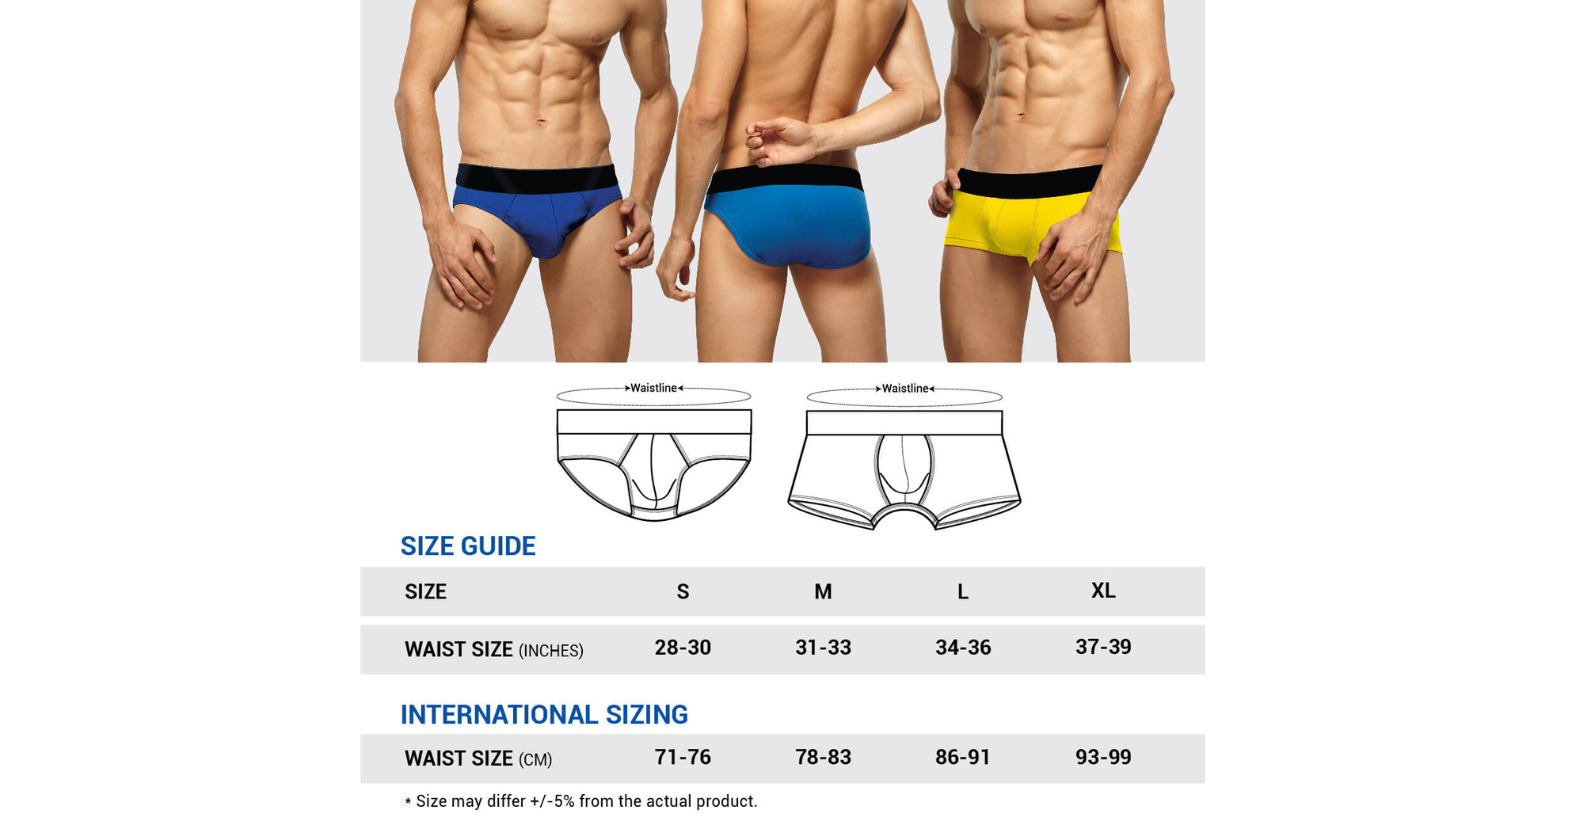 Mens underwear size chart for boxers in CM and inches